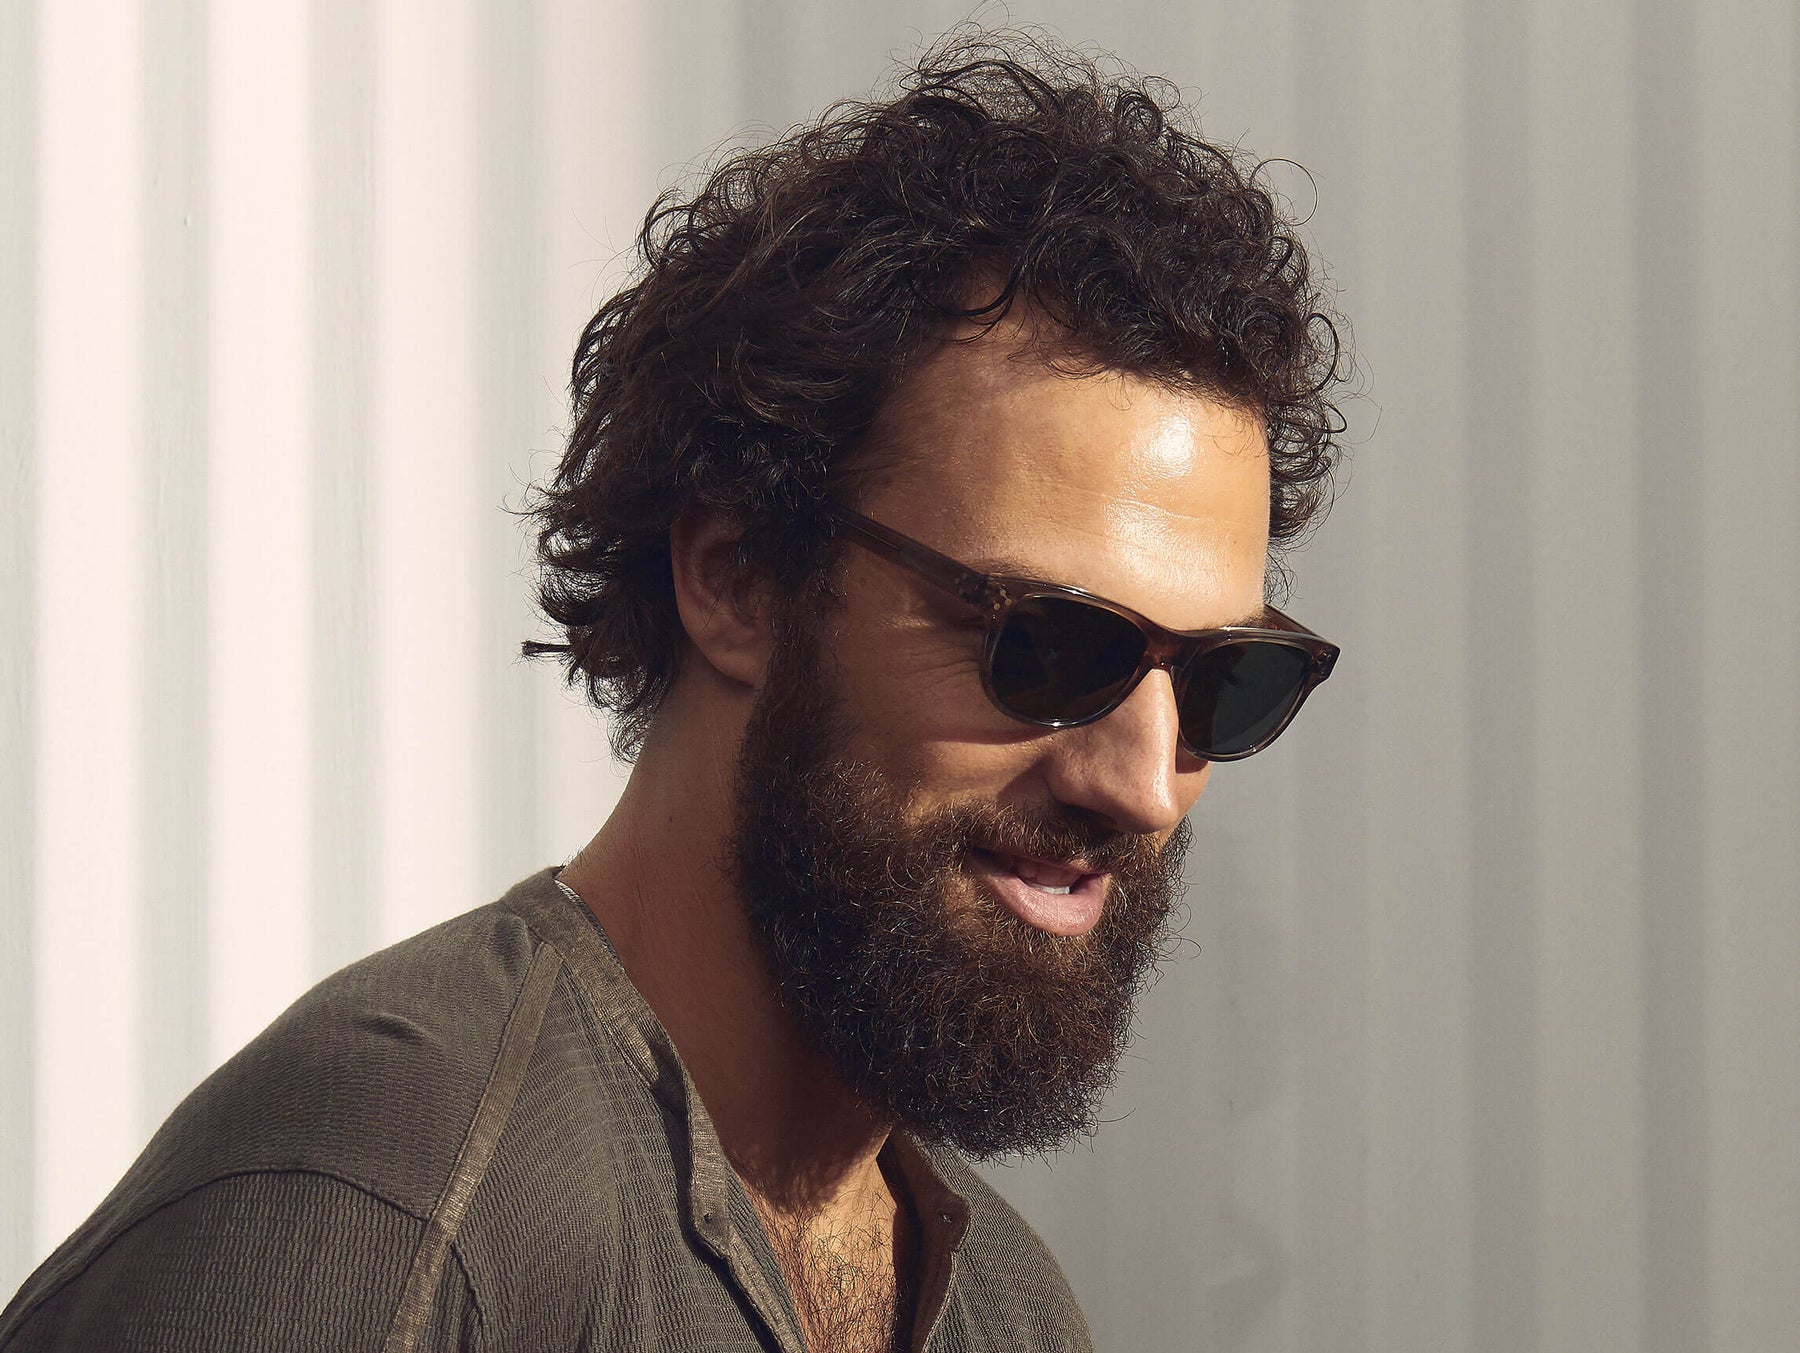 Model is wearing The ZETZ SUN in Brown Ash in size 51 with G-15 Glass Lenses